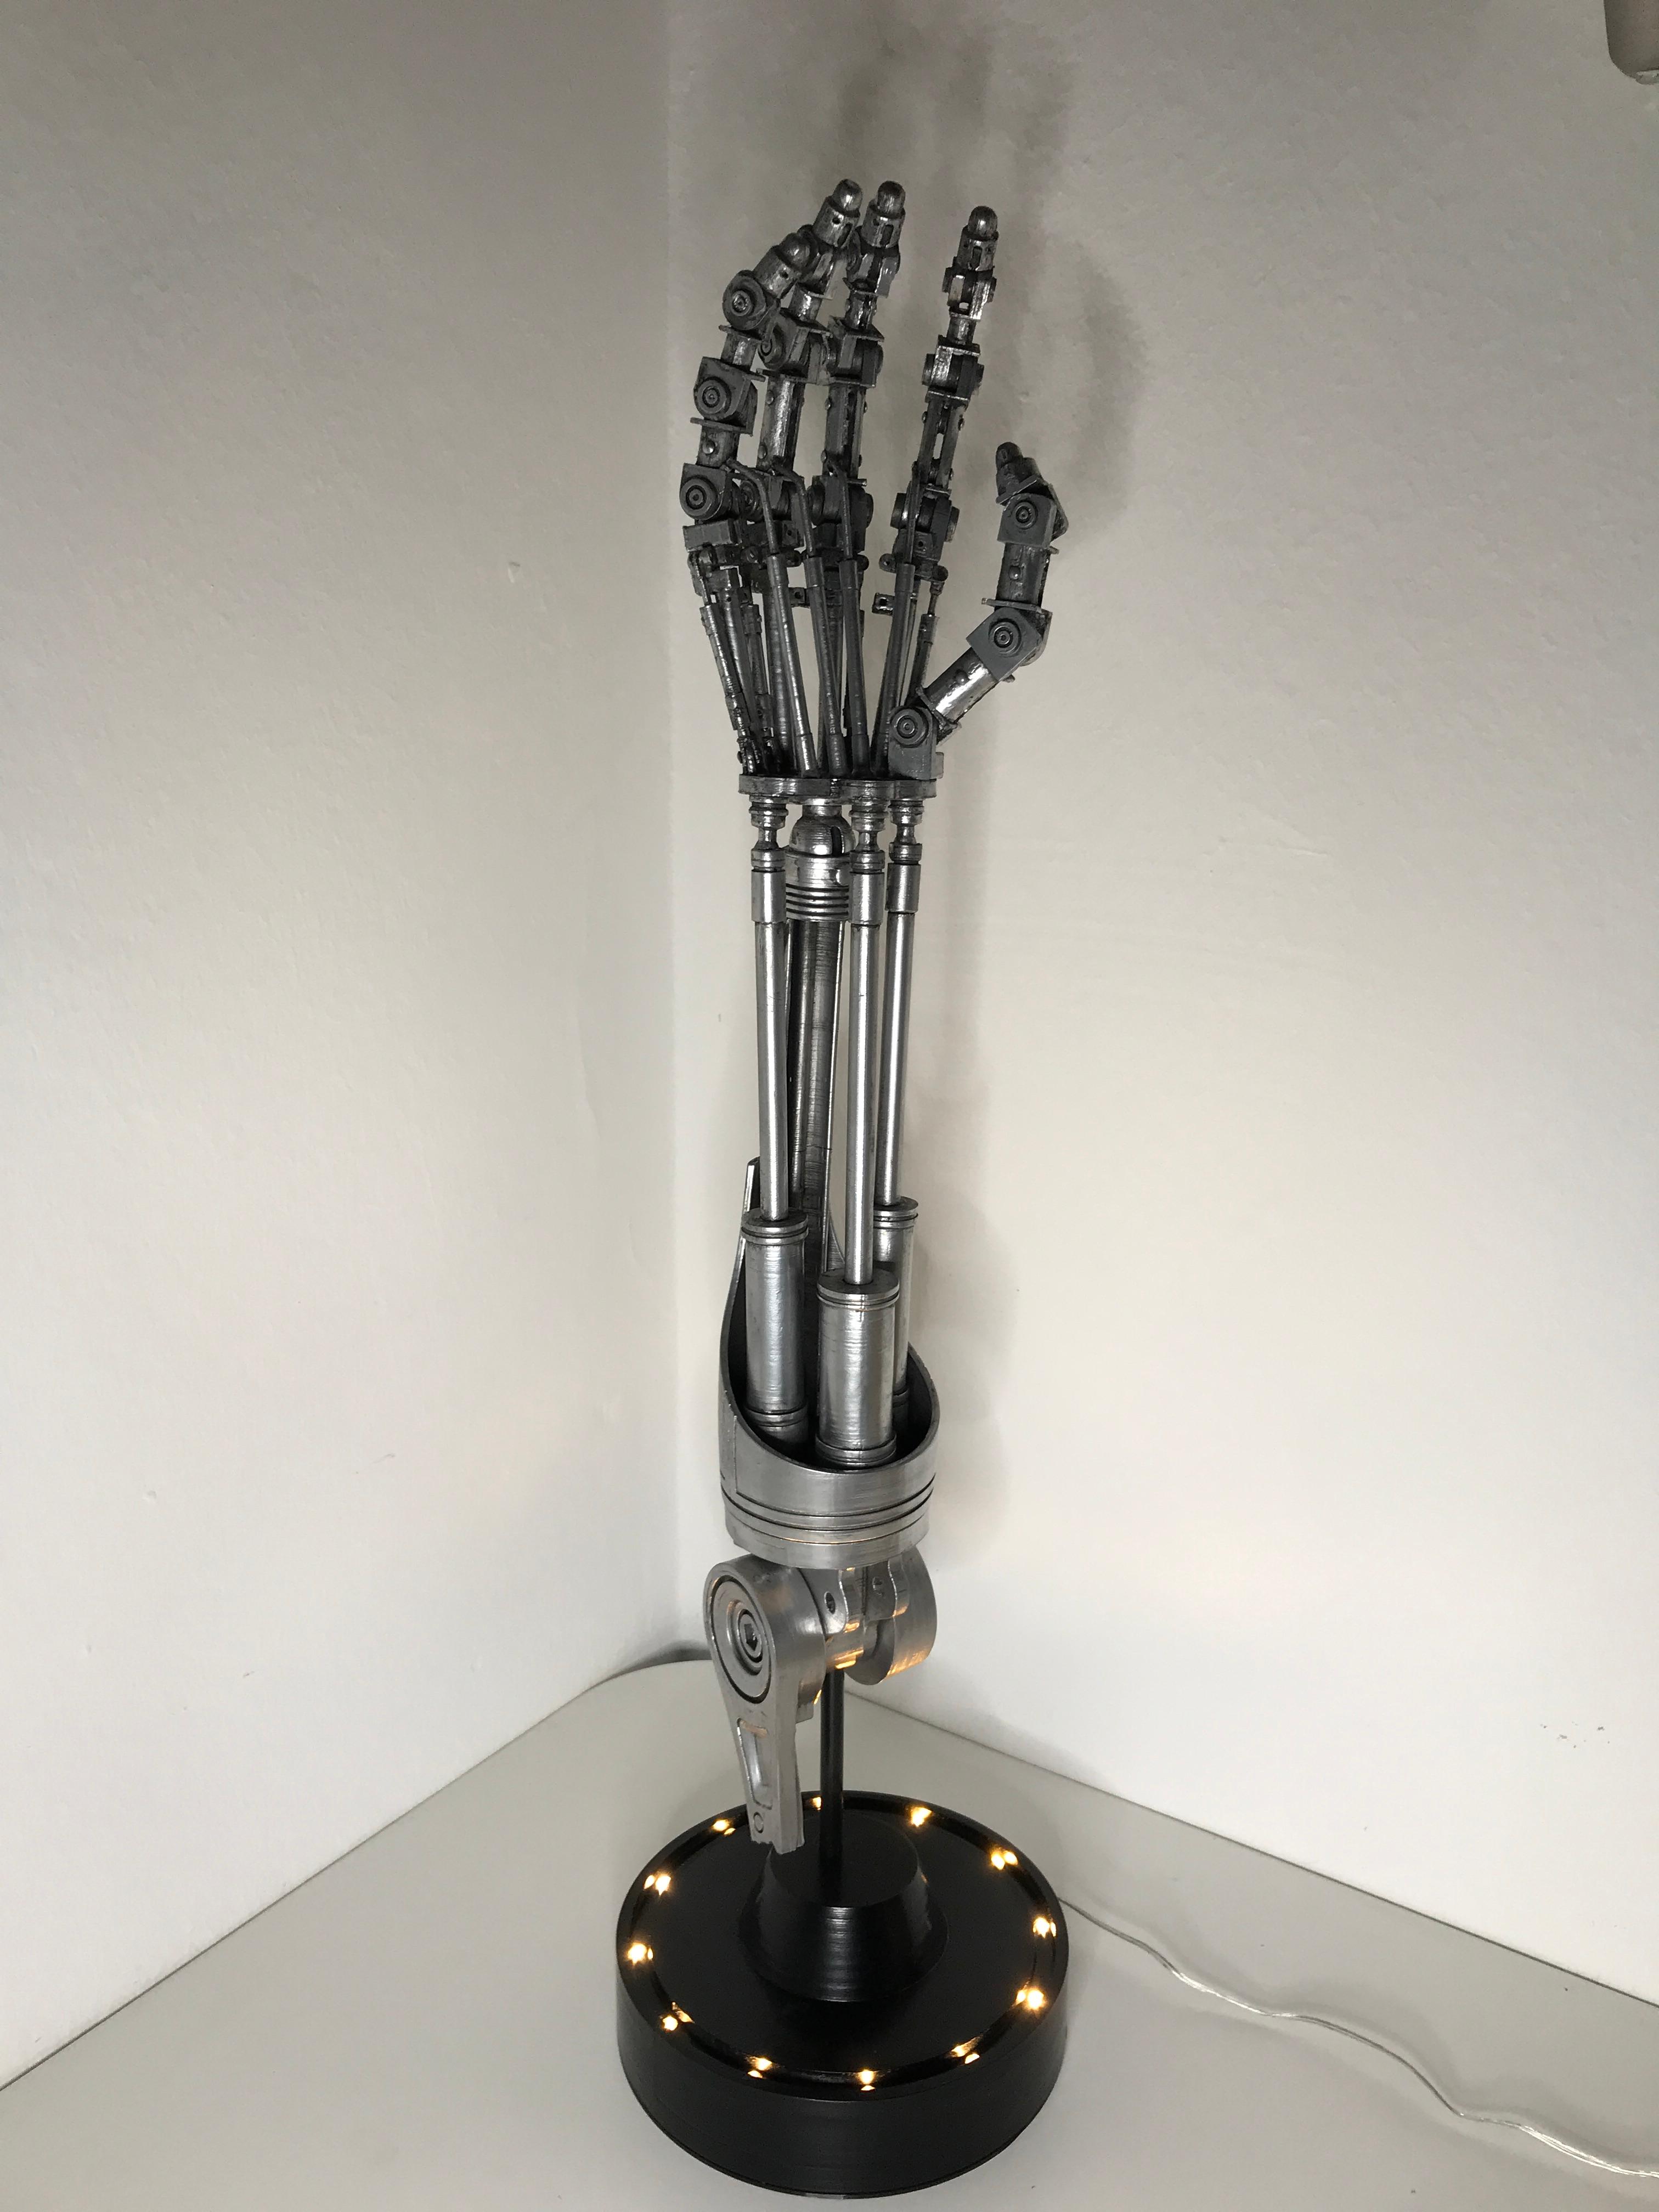 1:1 Terminator Arm with Lights 3d model